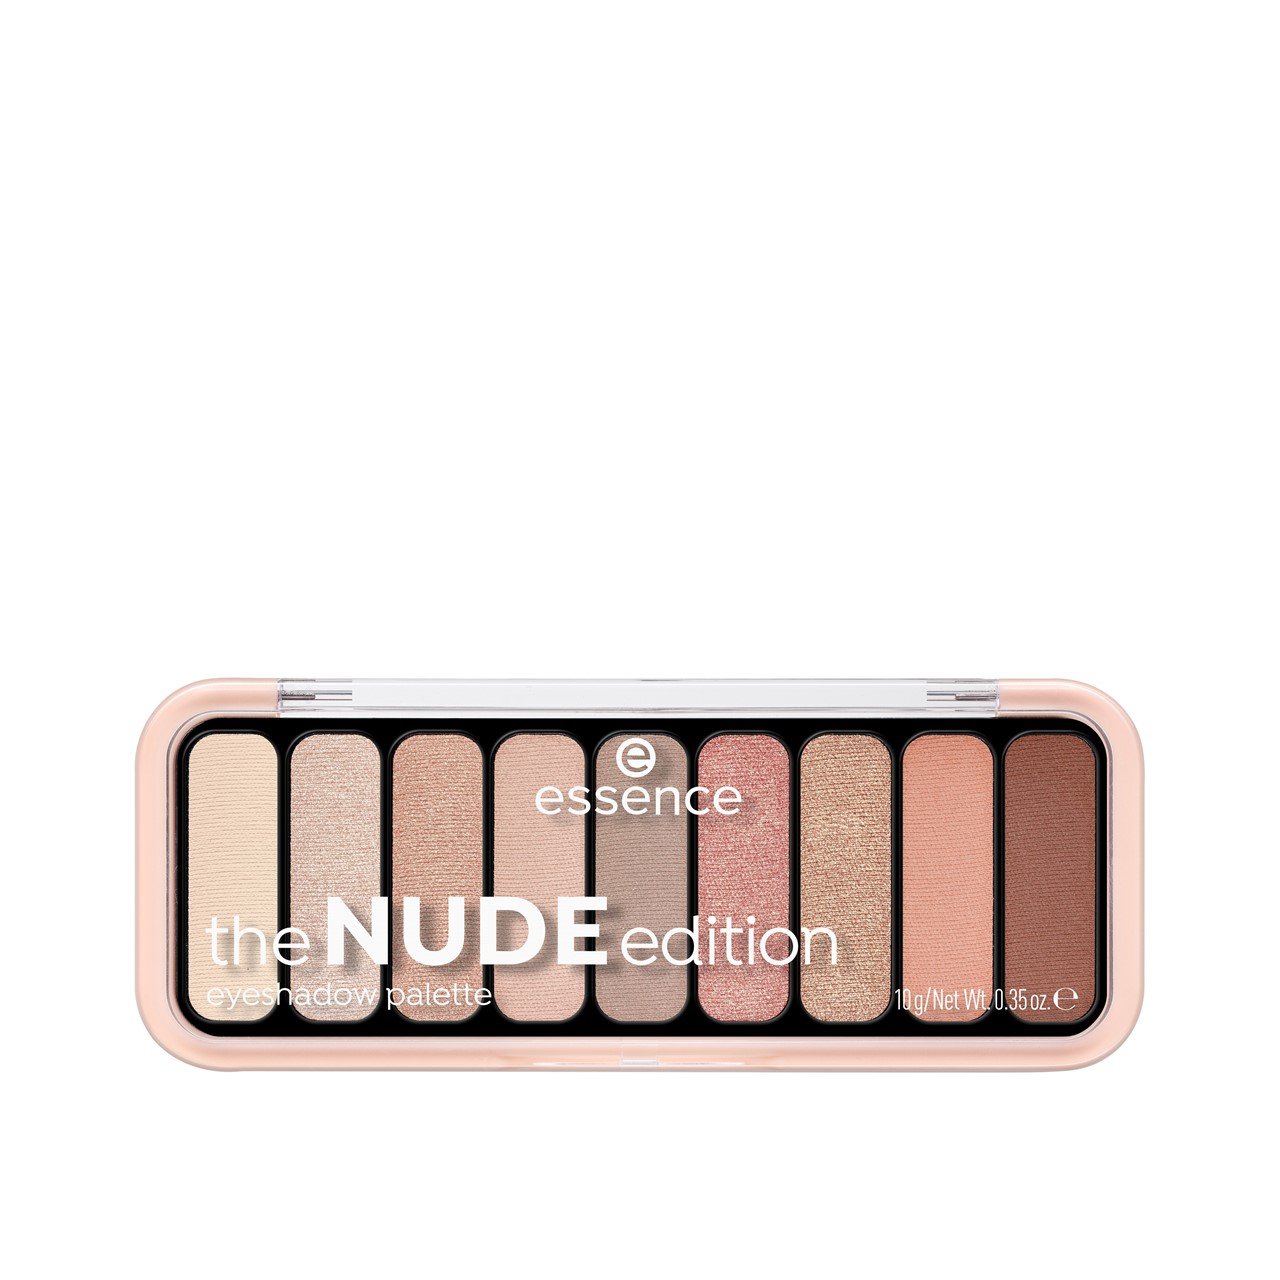 In USA 10g 10 NUDE Buy Palette essence · Eyeshadow the Edition Nude Pretty (0.35oz)